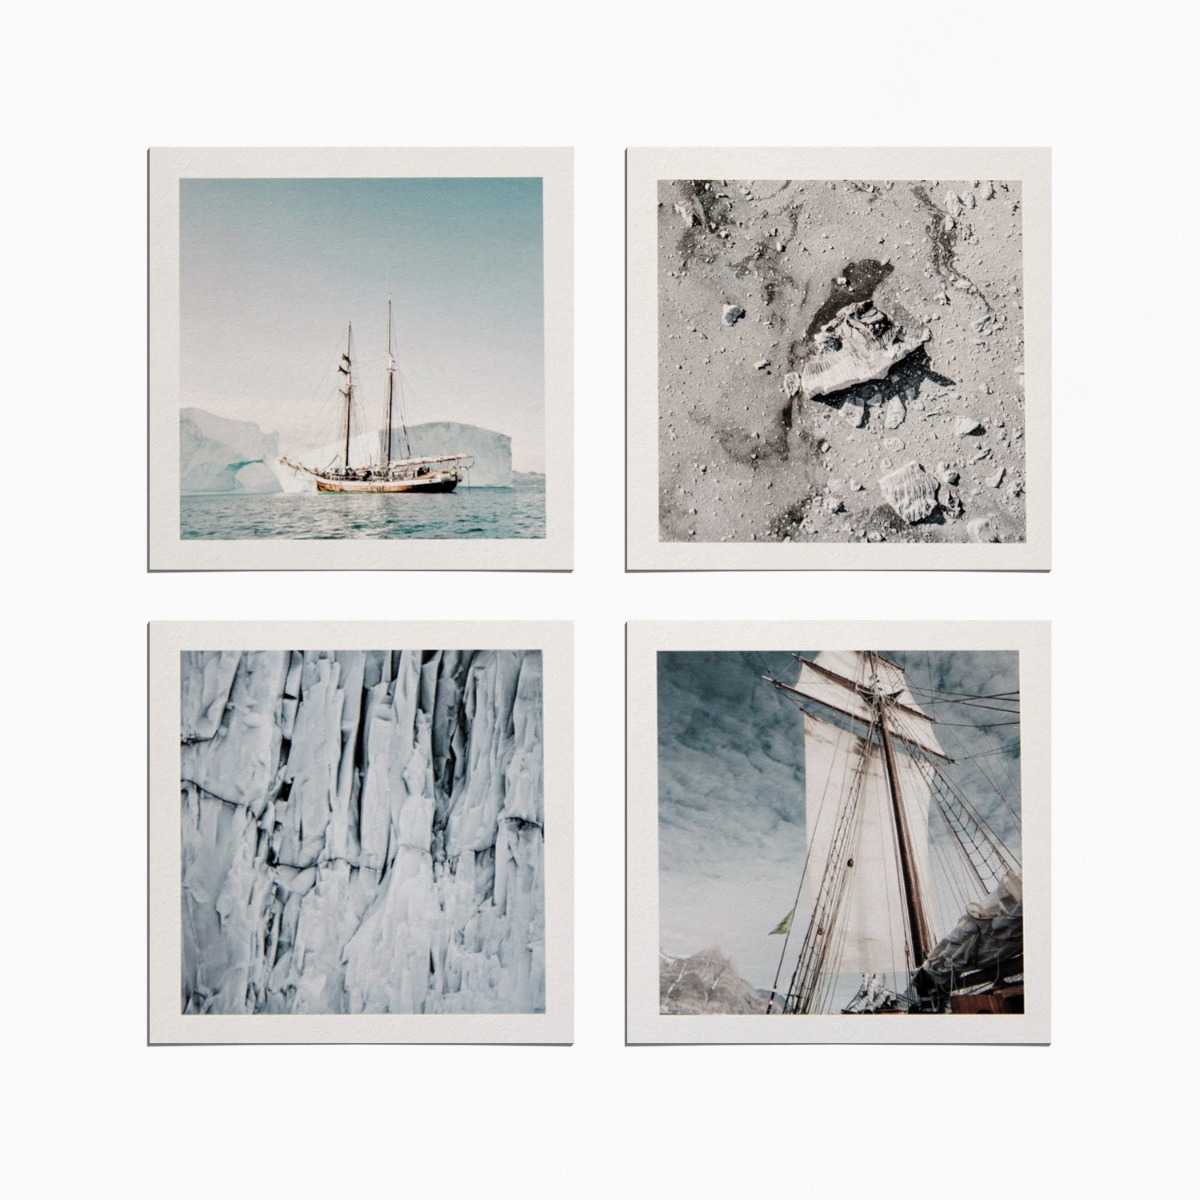 photo card set of 4 depicting an arctic expedition: 1 card has an image of a sailboat navigating through icebergs, 1 card has a close-up of rocky sand, 1 card has an image of an ice cliff, and 1 card has a close-up image of sails